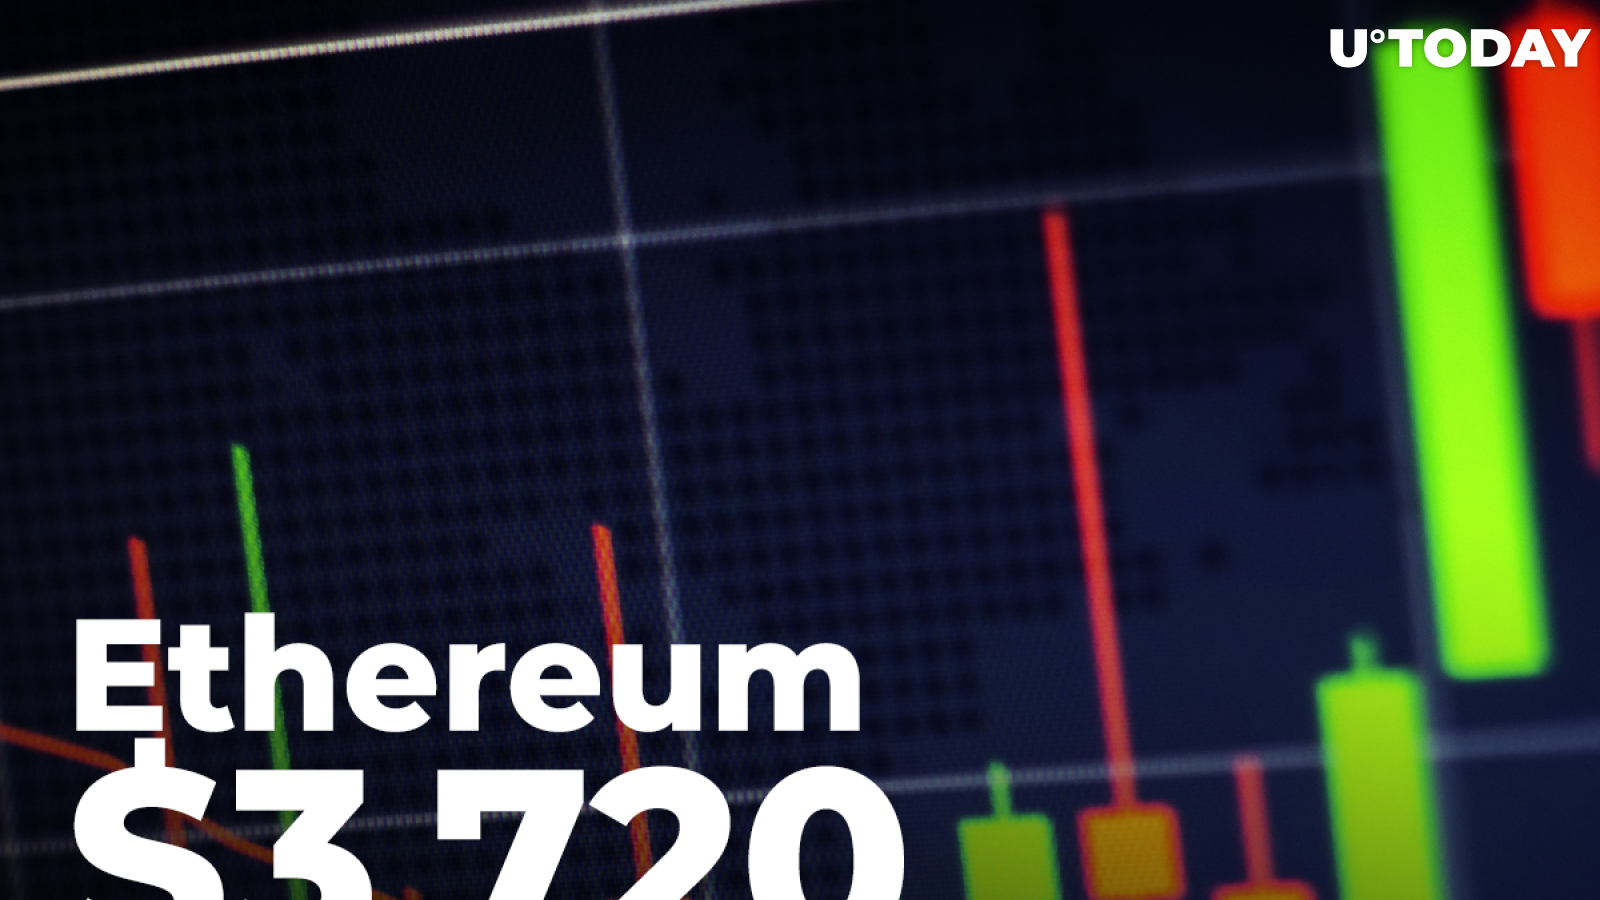  Ethereum Prints Big Green Candle, Rising to $3,720